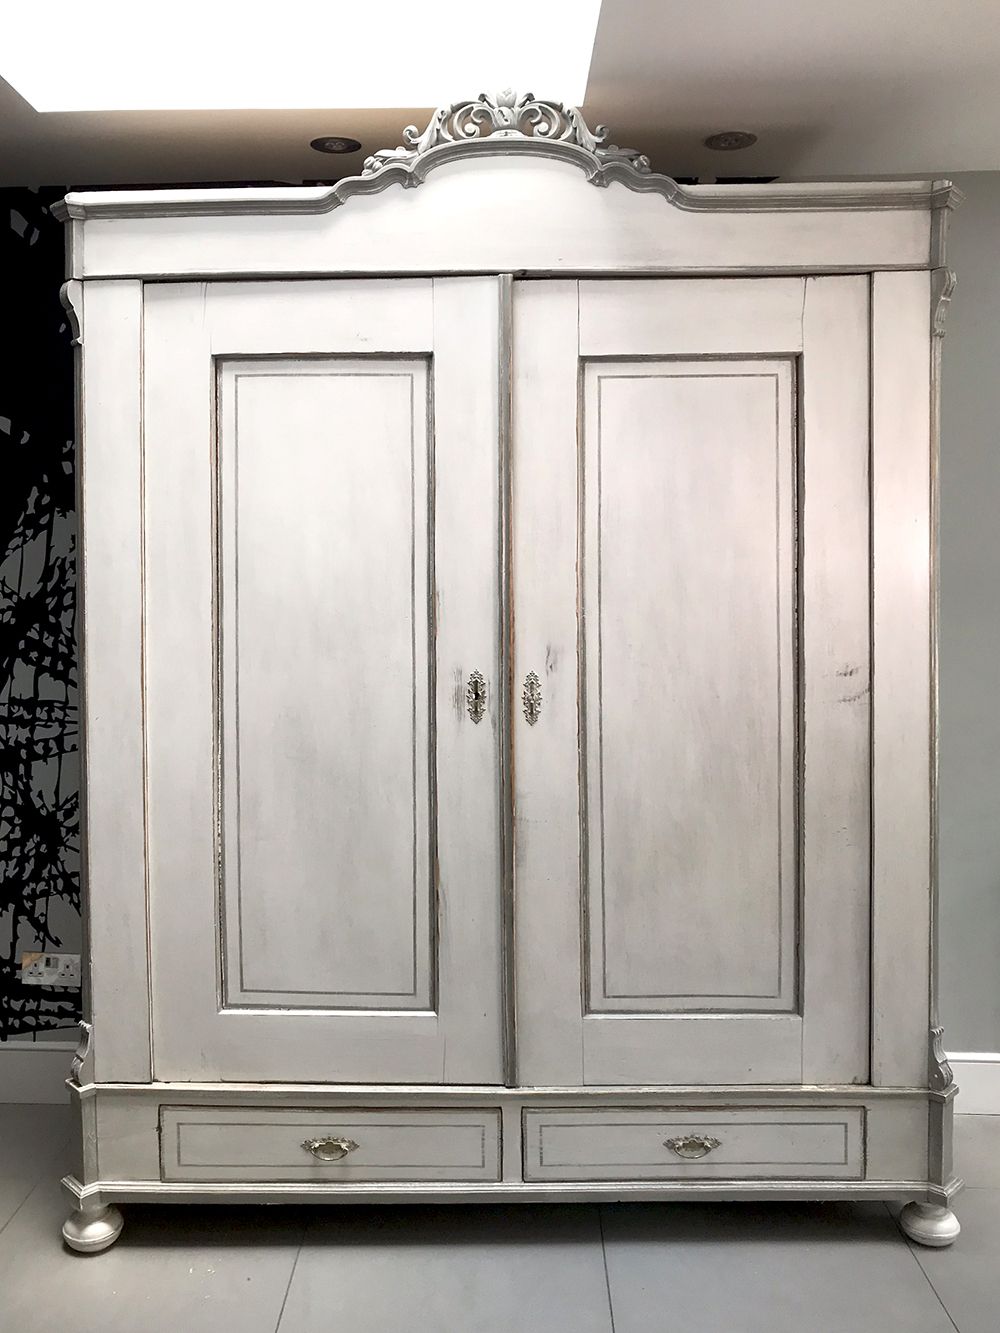 Antique French Painted Armoire – Sold | Napoleonrockefeller – Vintage And  Retro Furniture, Bespoke Hand Crafted Chairs And Seating With Regard To Antique French Wardrobes (View 5 of 20)